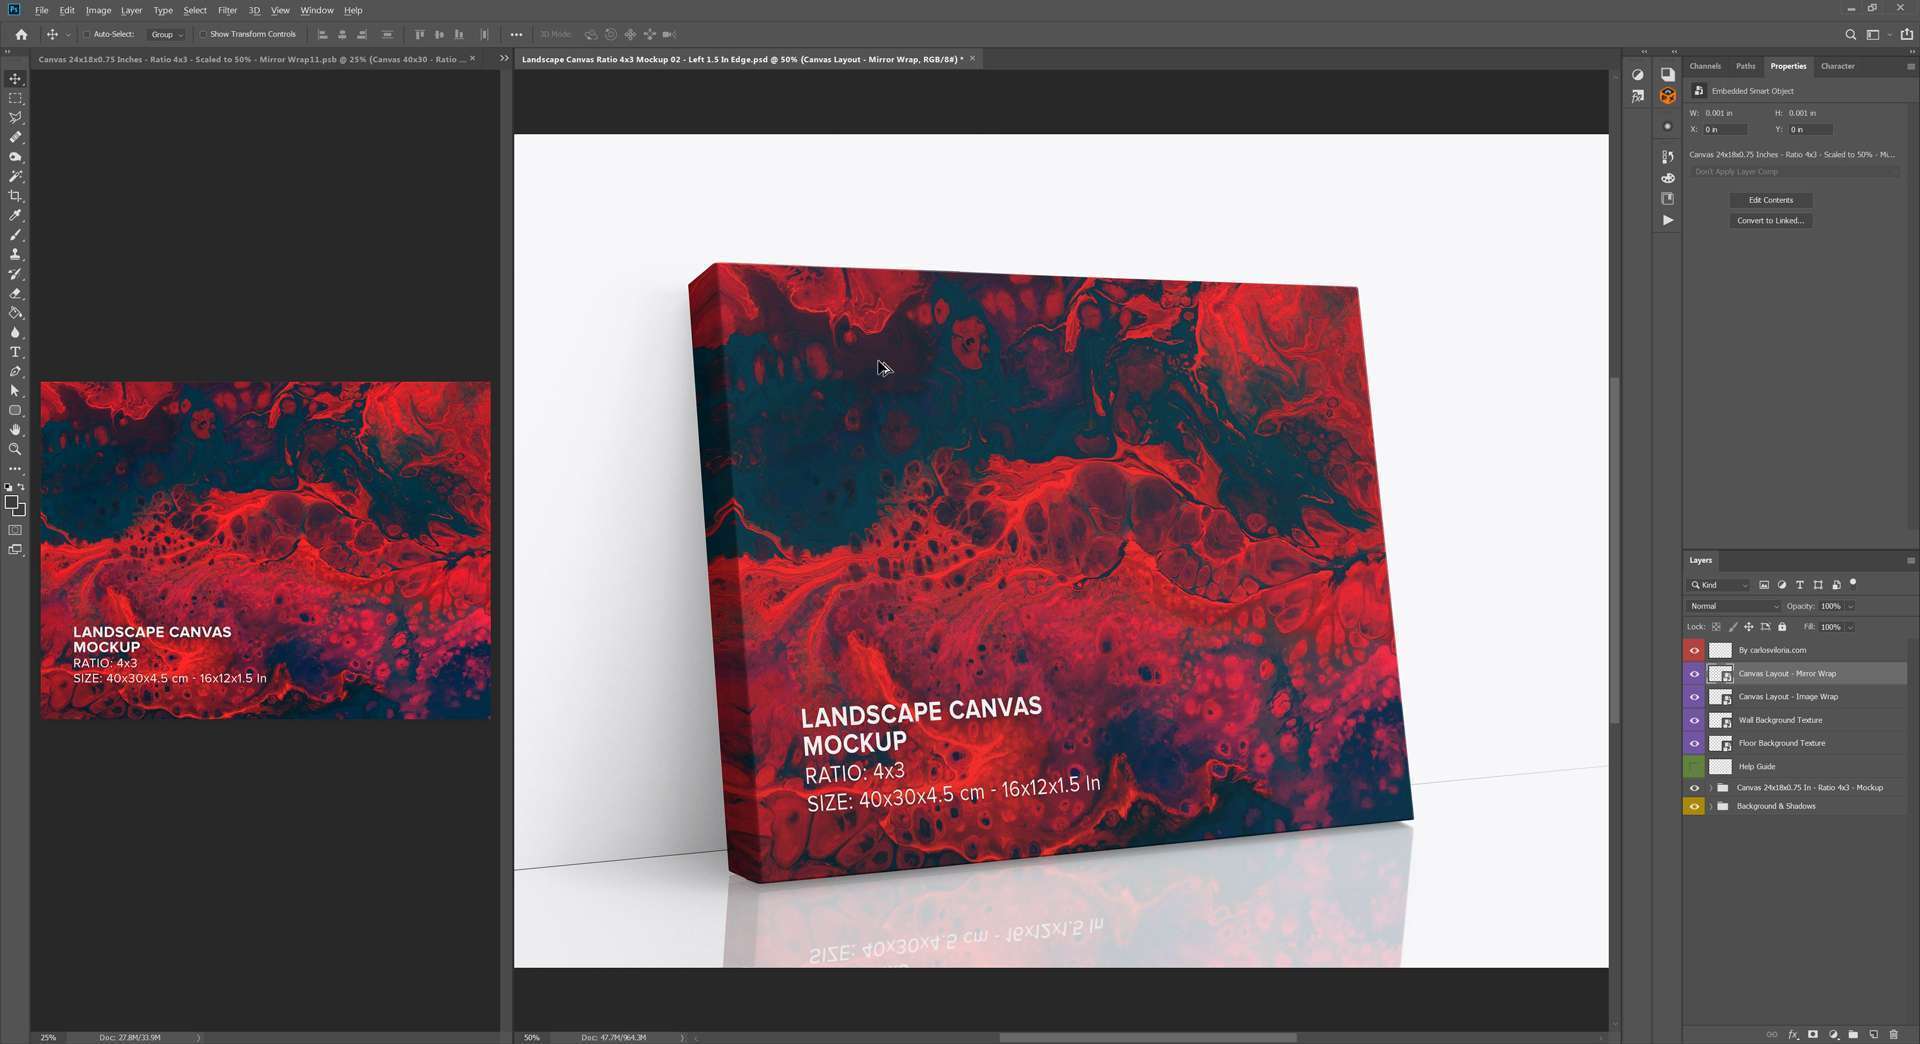 Leaning Canvas Ratio 4x3 Mockup - Left 1.5 in Wrap